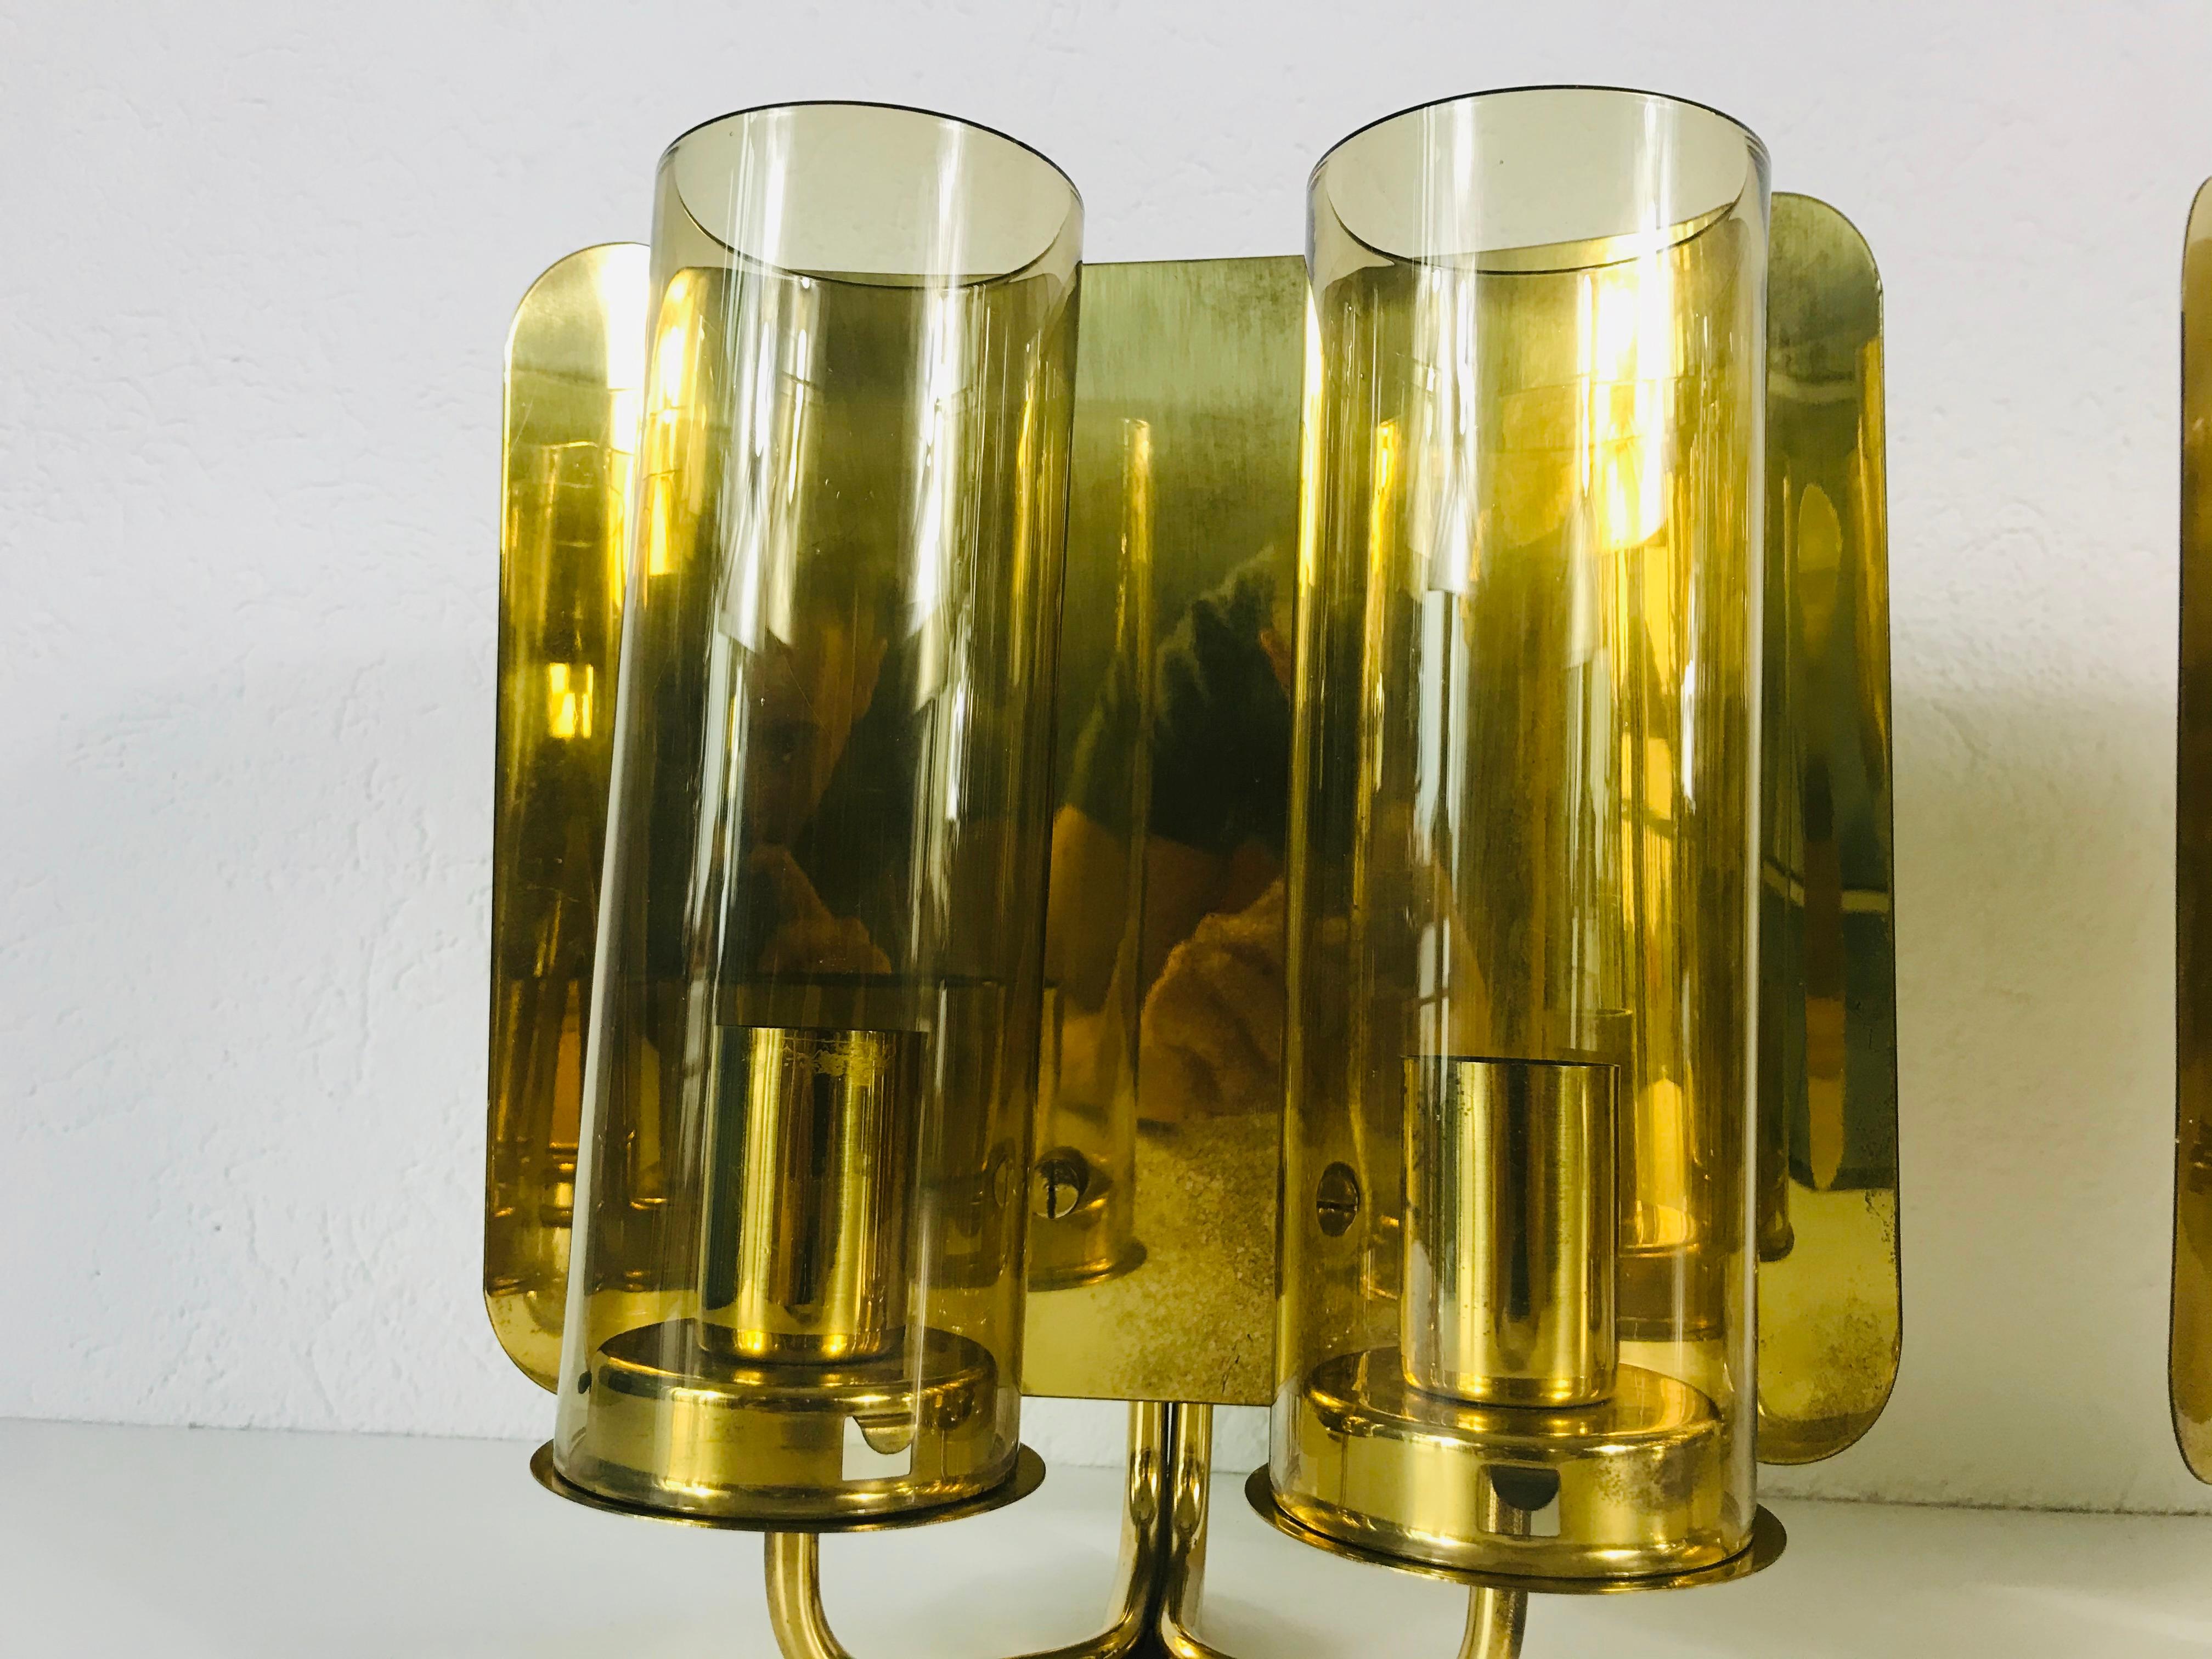 Pair of Mid-Century Modern Brass Sconces by Hans-Agne Jakobsson, Sweden, 1960s For Sale 4